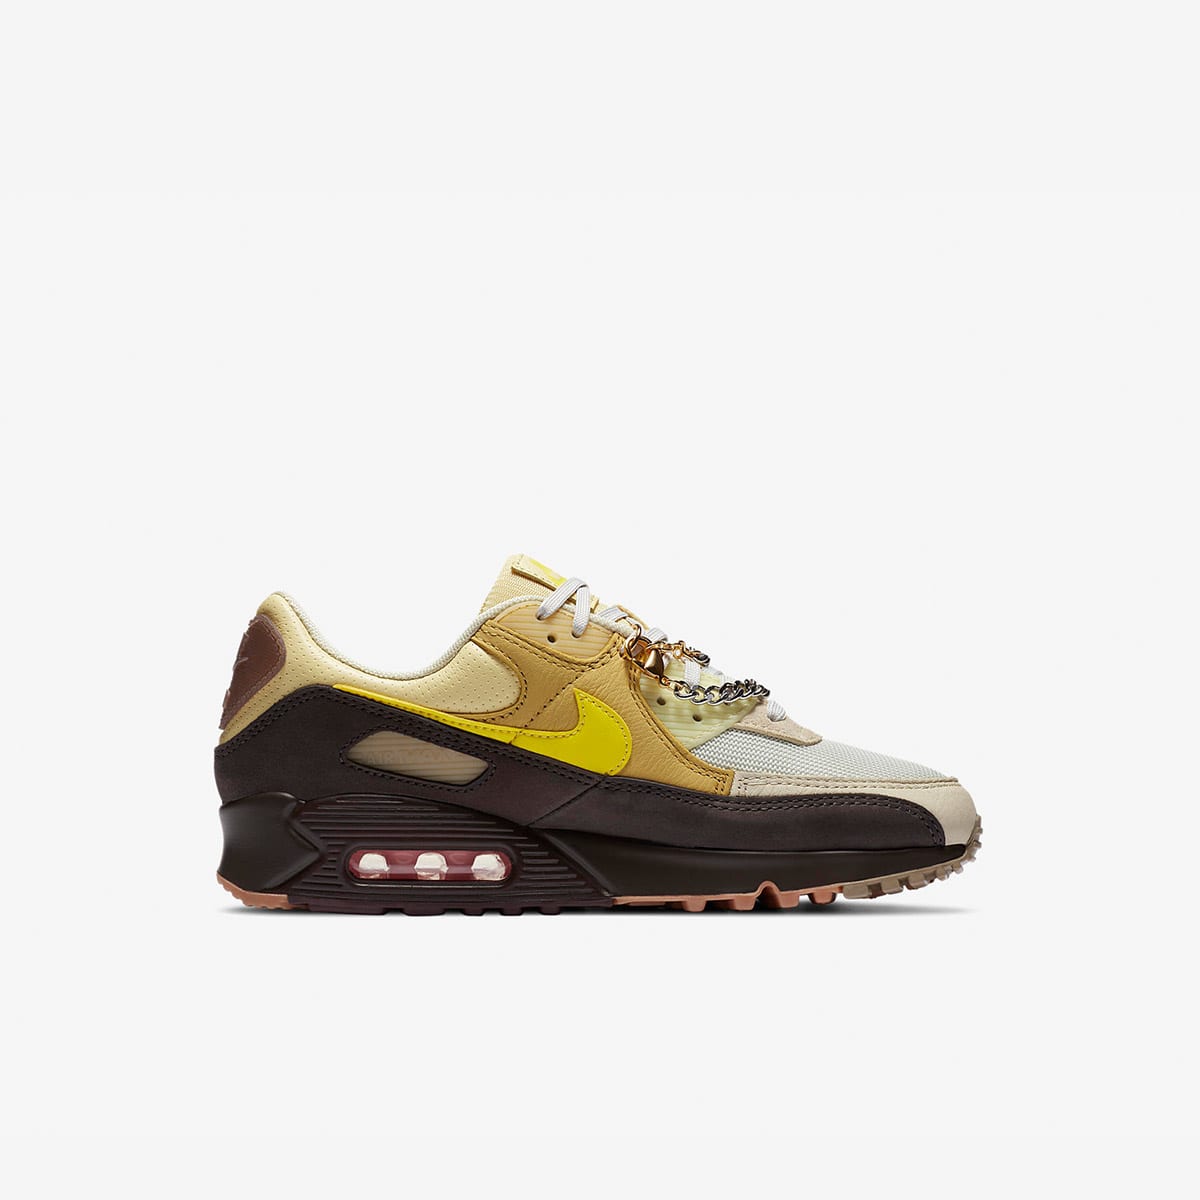 Nike Air Max 90 W (Velvet Brown & Pink) | END. Launches